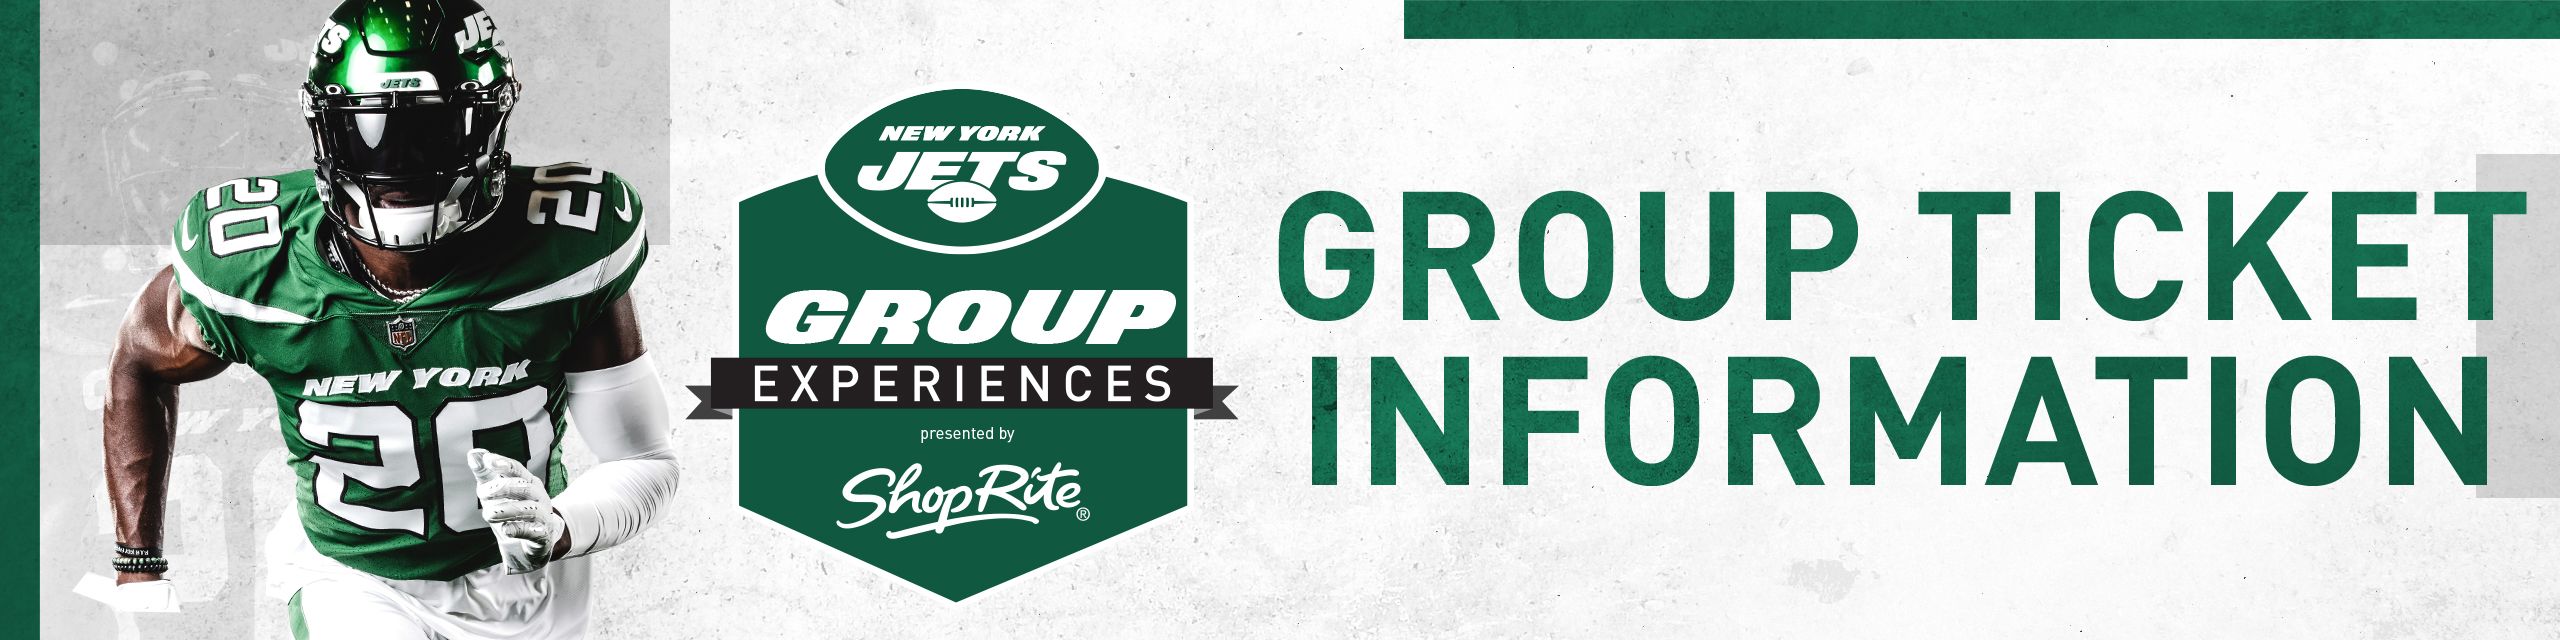 New York Jets Group Tickets